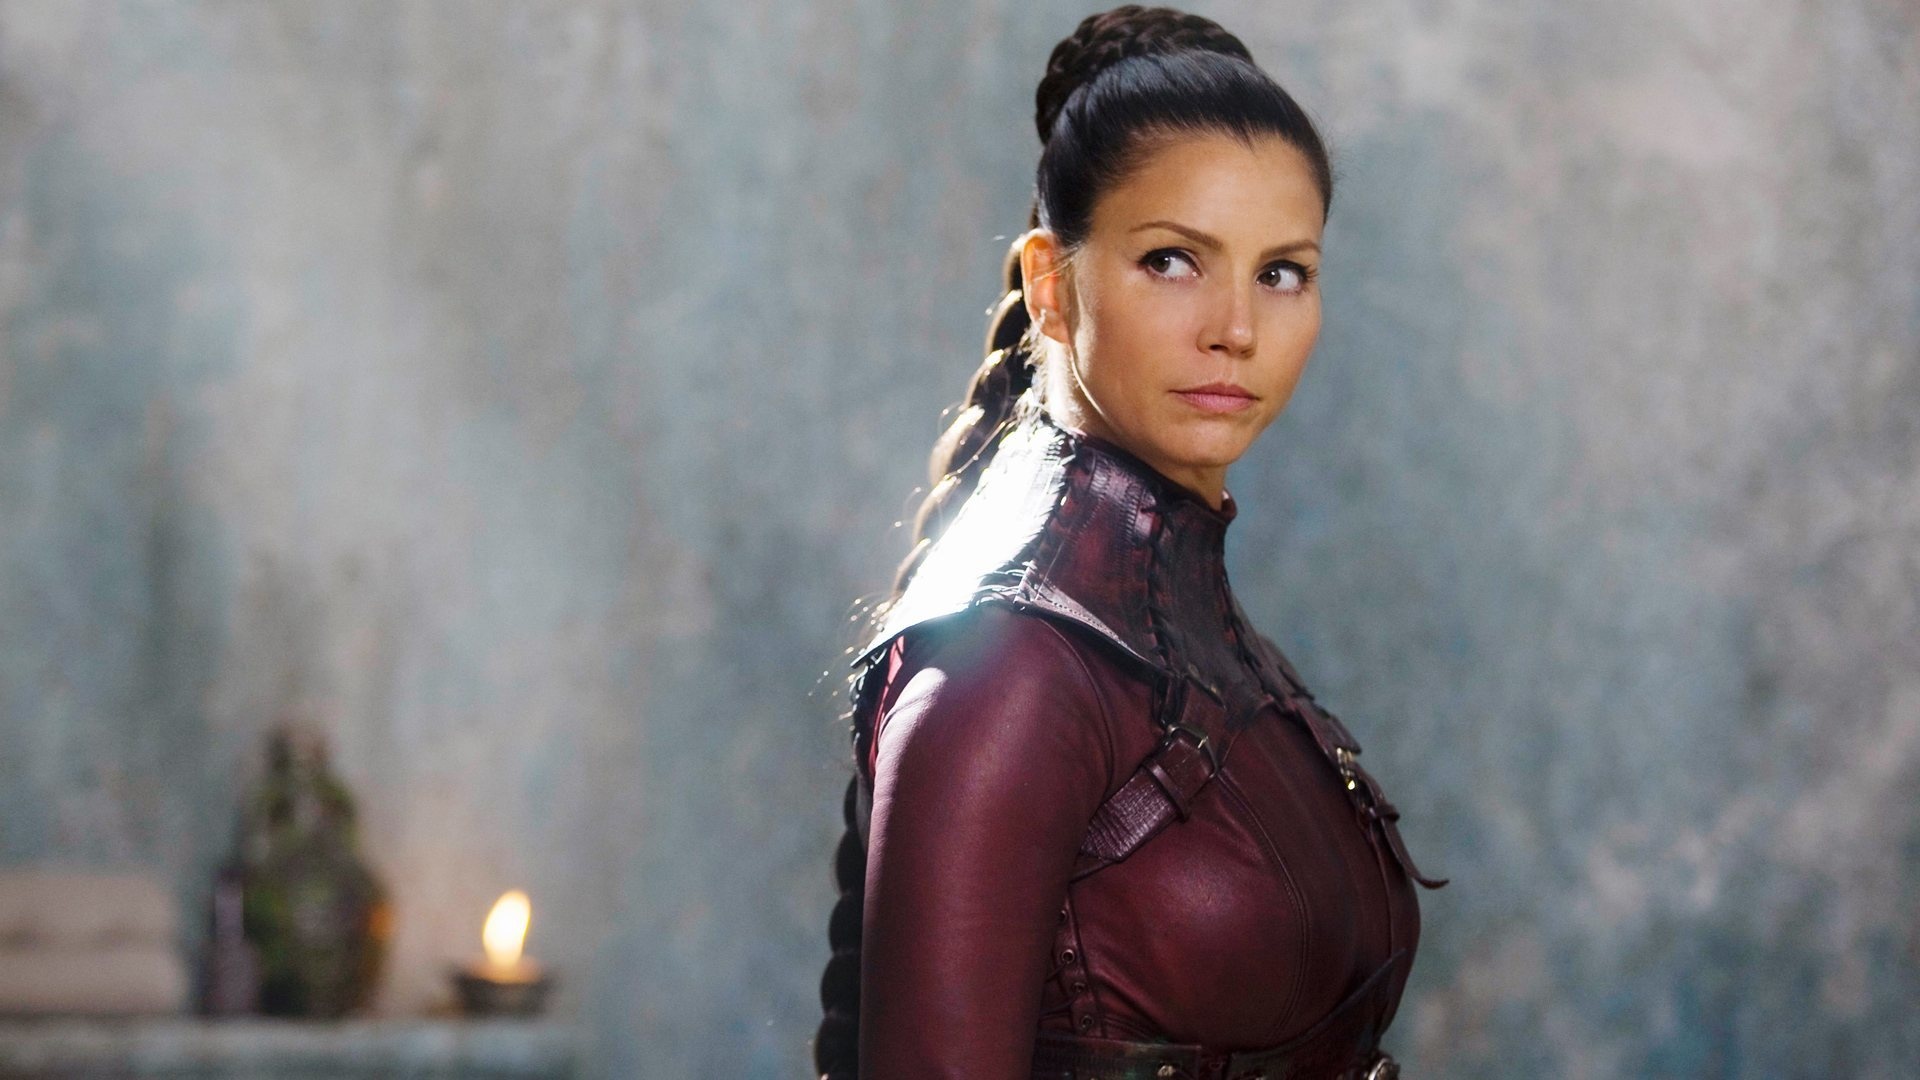 Legend of the Seeker (TV Series): Charisma Carpenter as Triana, An American actress from Las Vegas. 1920x1080 Full HD Background.